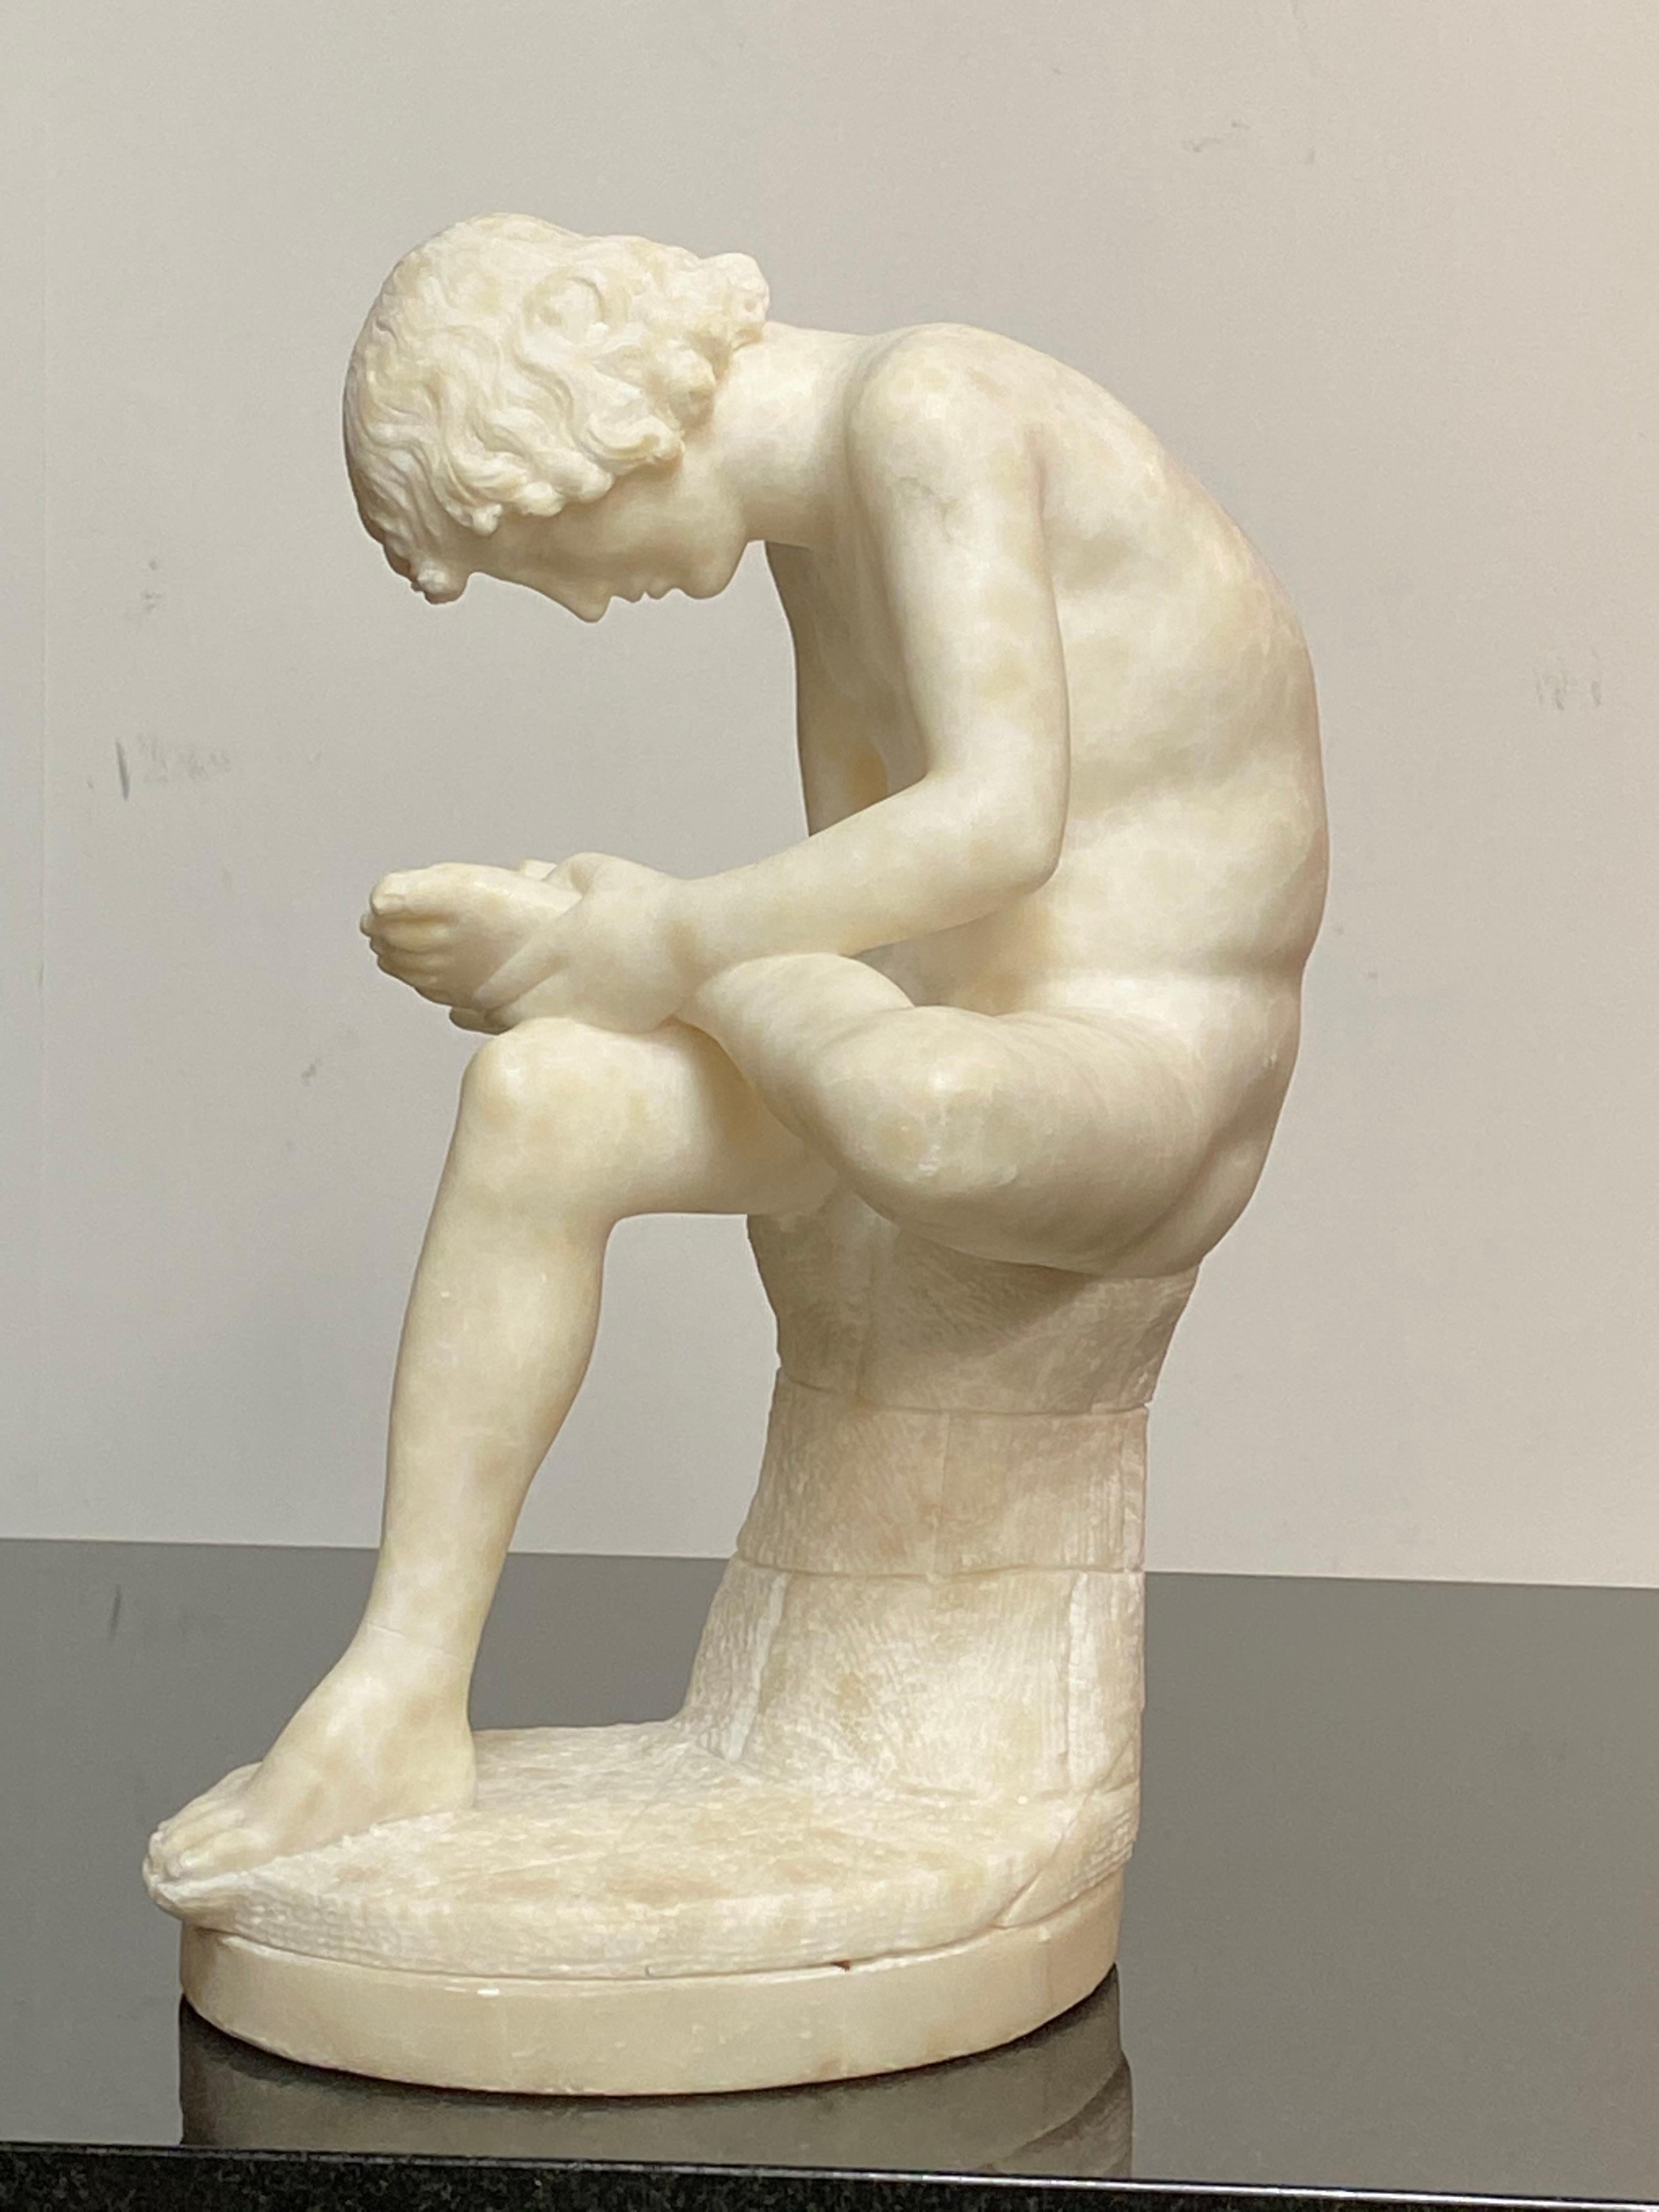 Mid-19th century tabletop size, masterfully carved, white alabaster figure of classical sculpture, known as either Fedele or Spinario.